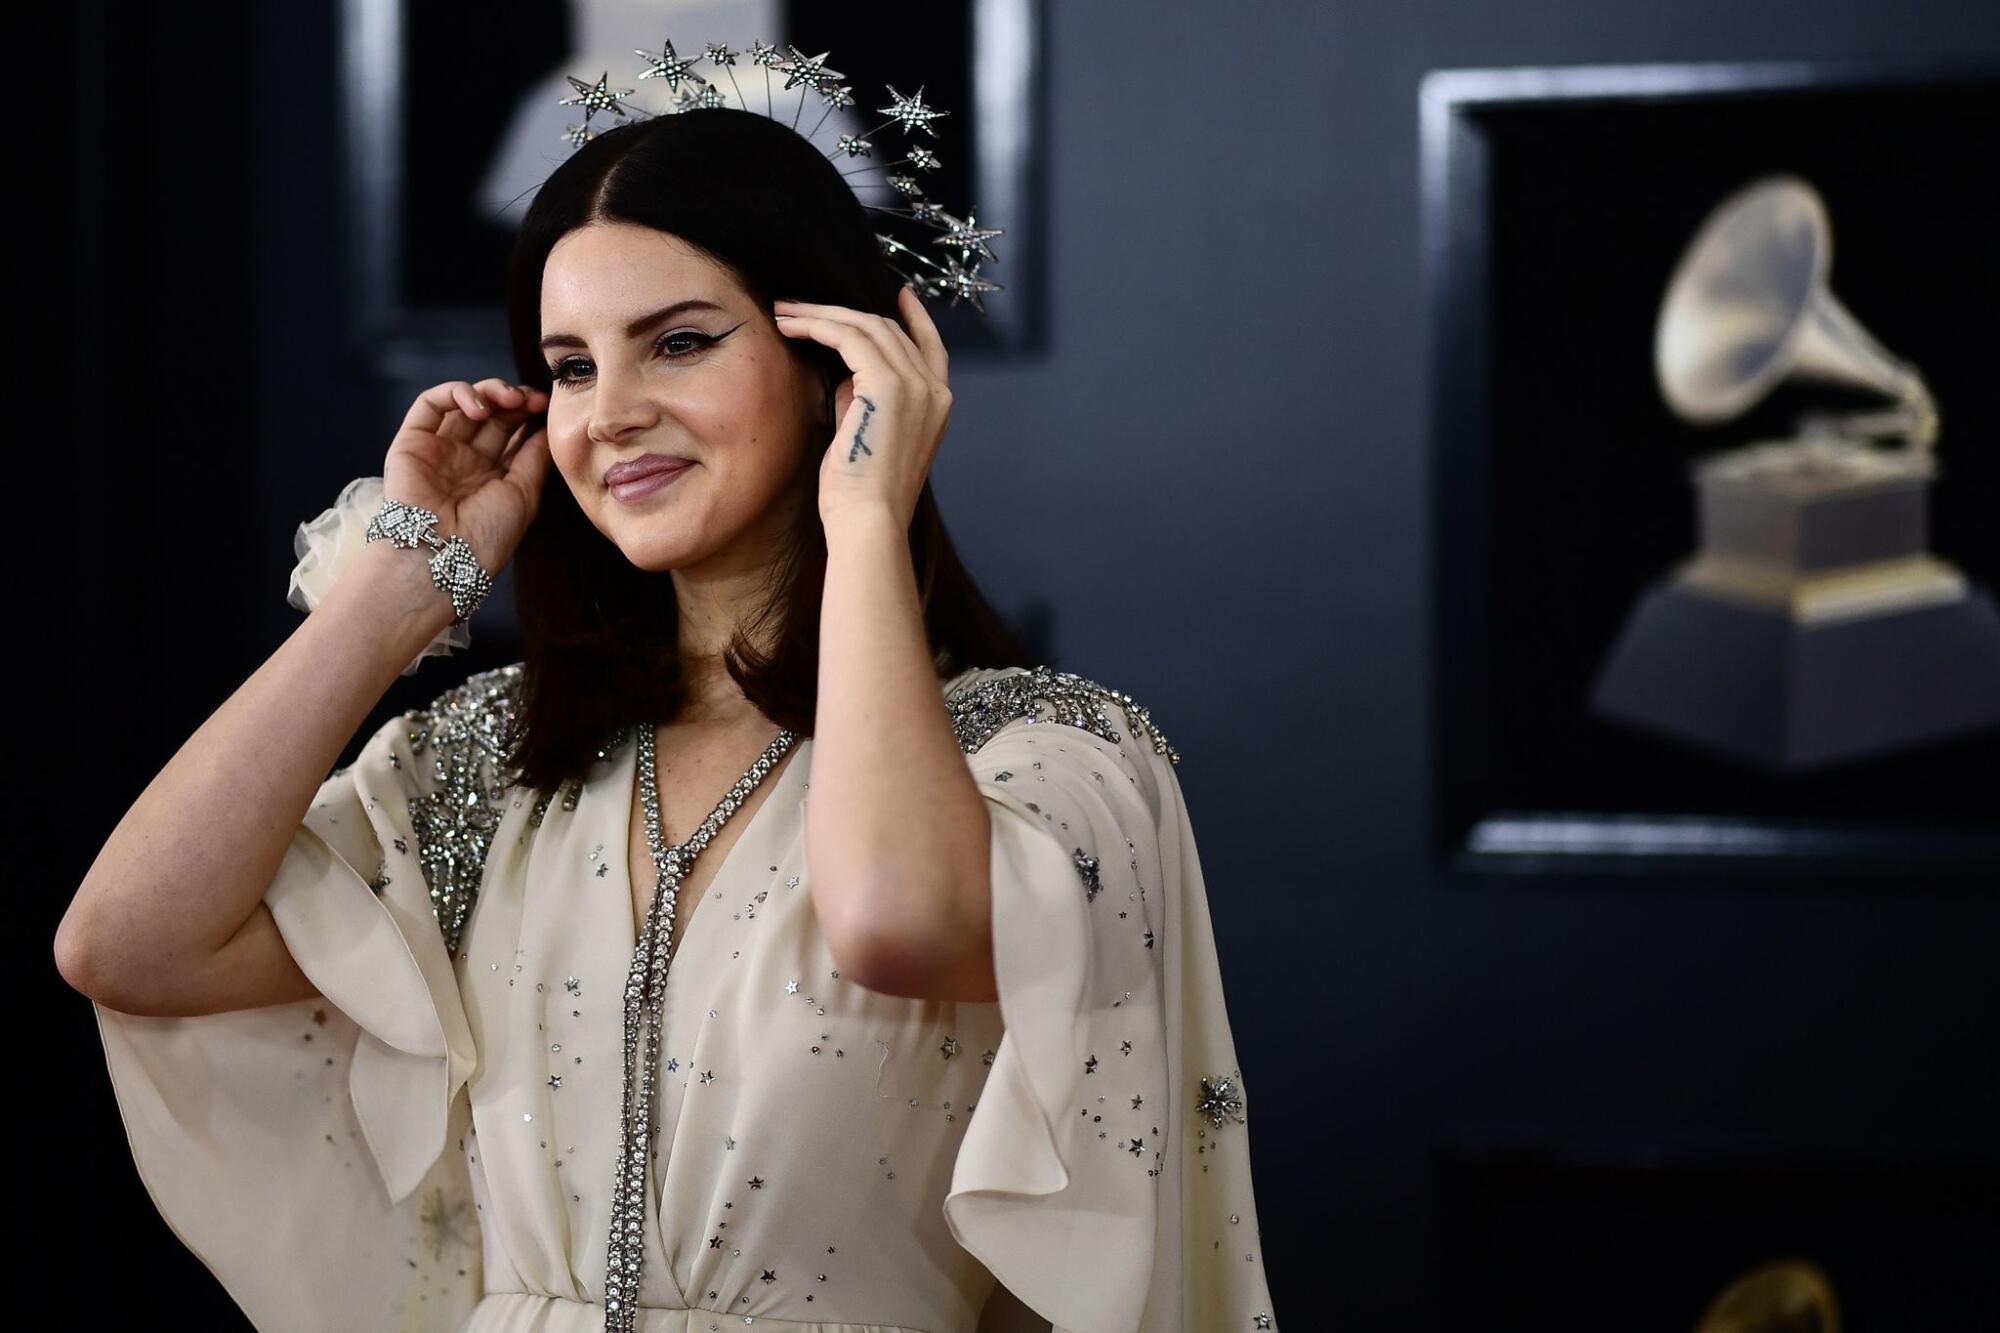 Lana Del Rey showed her support for the Time's Up movement with a white rose corsage on her wrist at the Grammy Awards, Jan. 28, 2018.